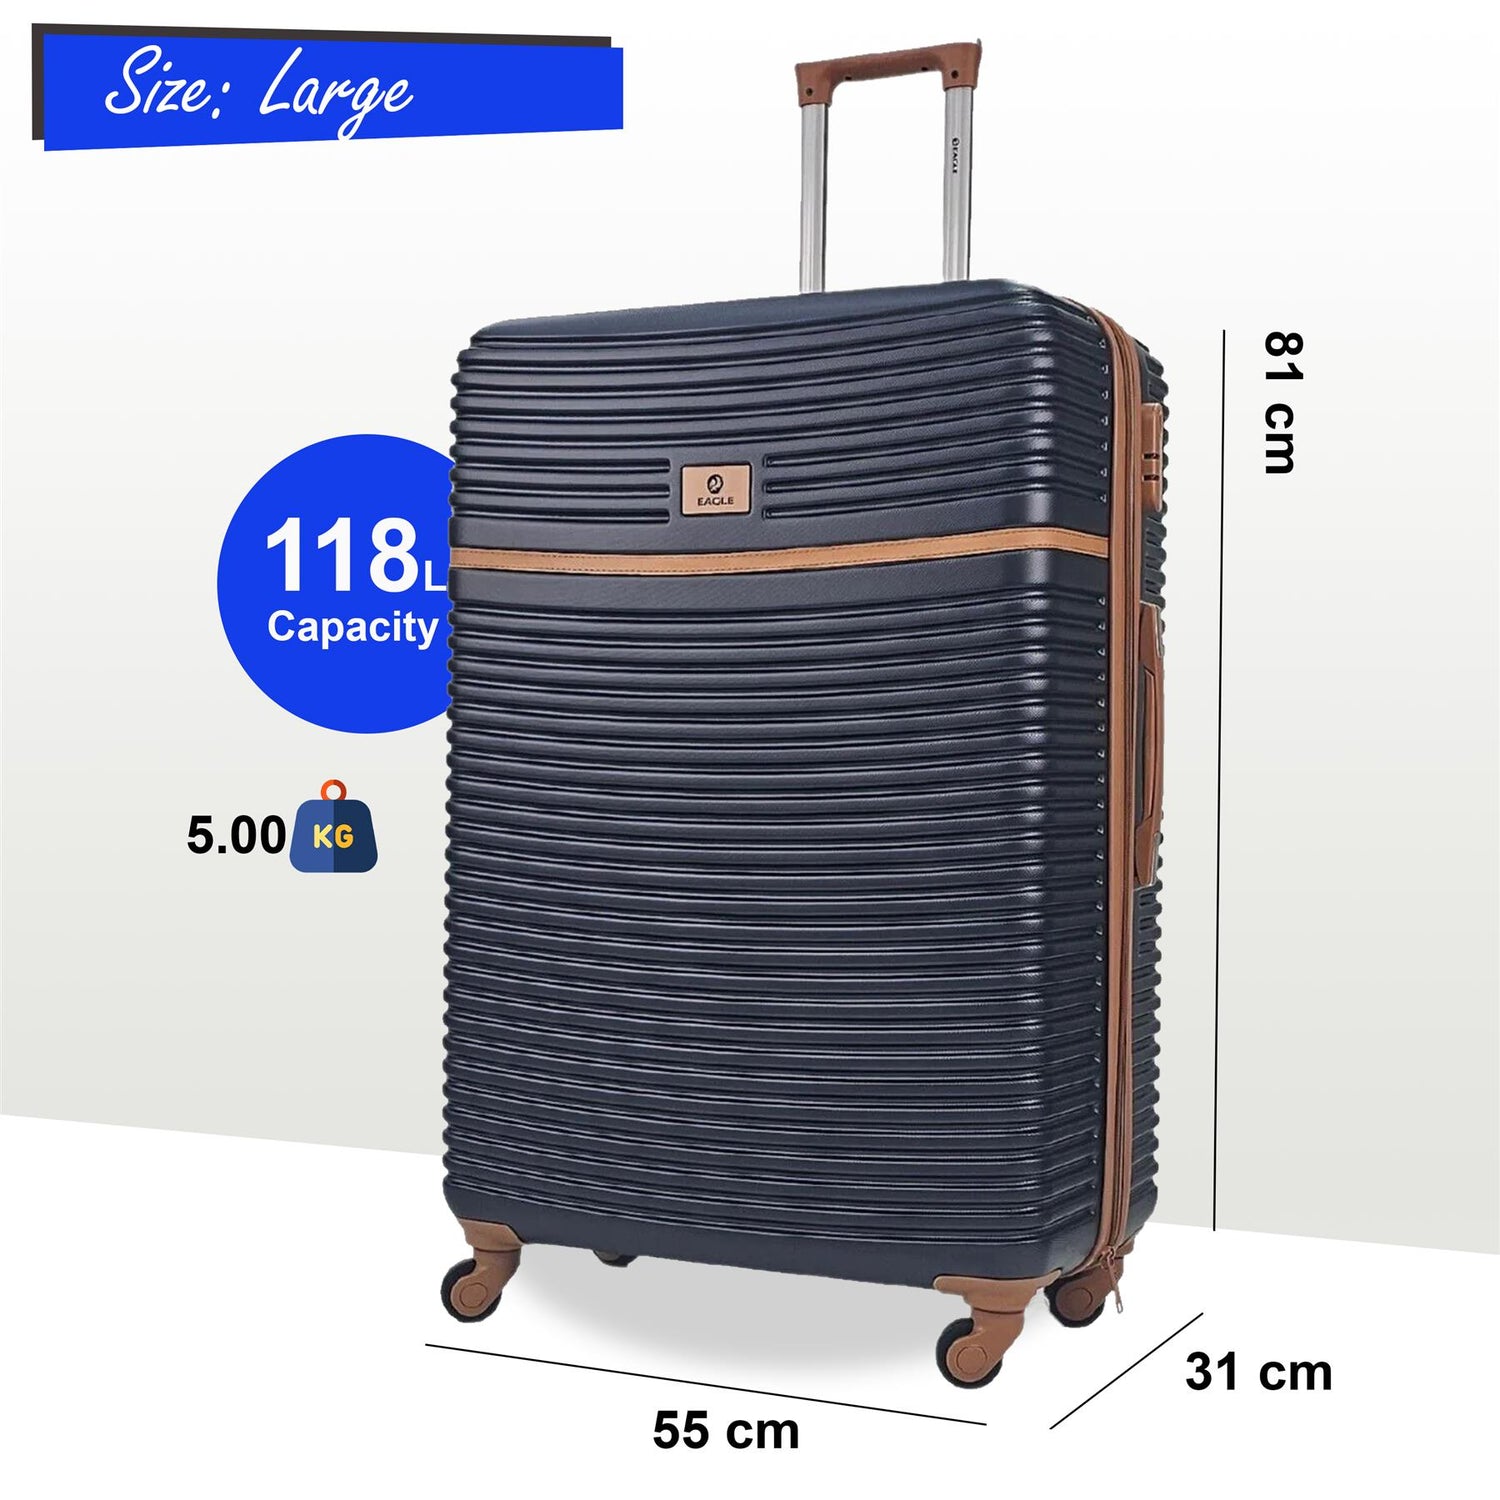 Bridgeport Large Hard Shell Suitcase in Navy